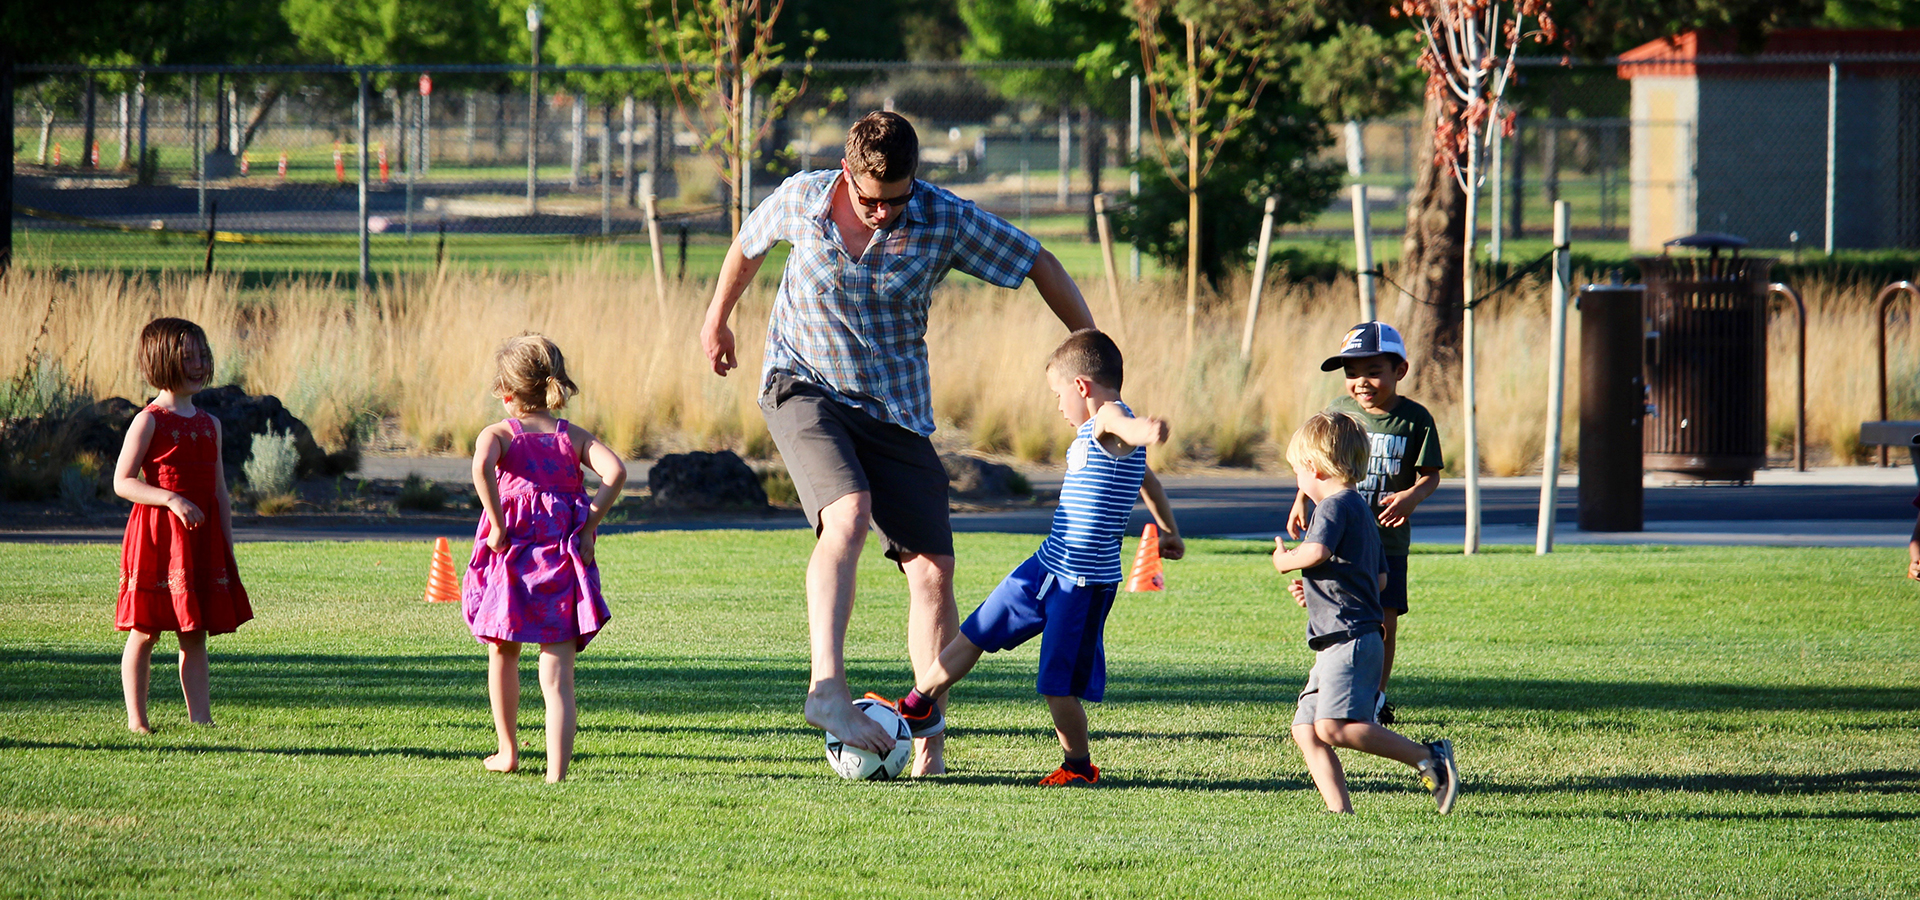 kids and an adult playing soccer in the grass